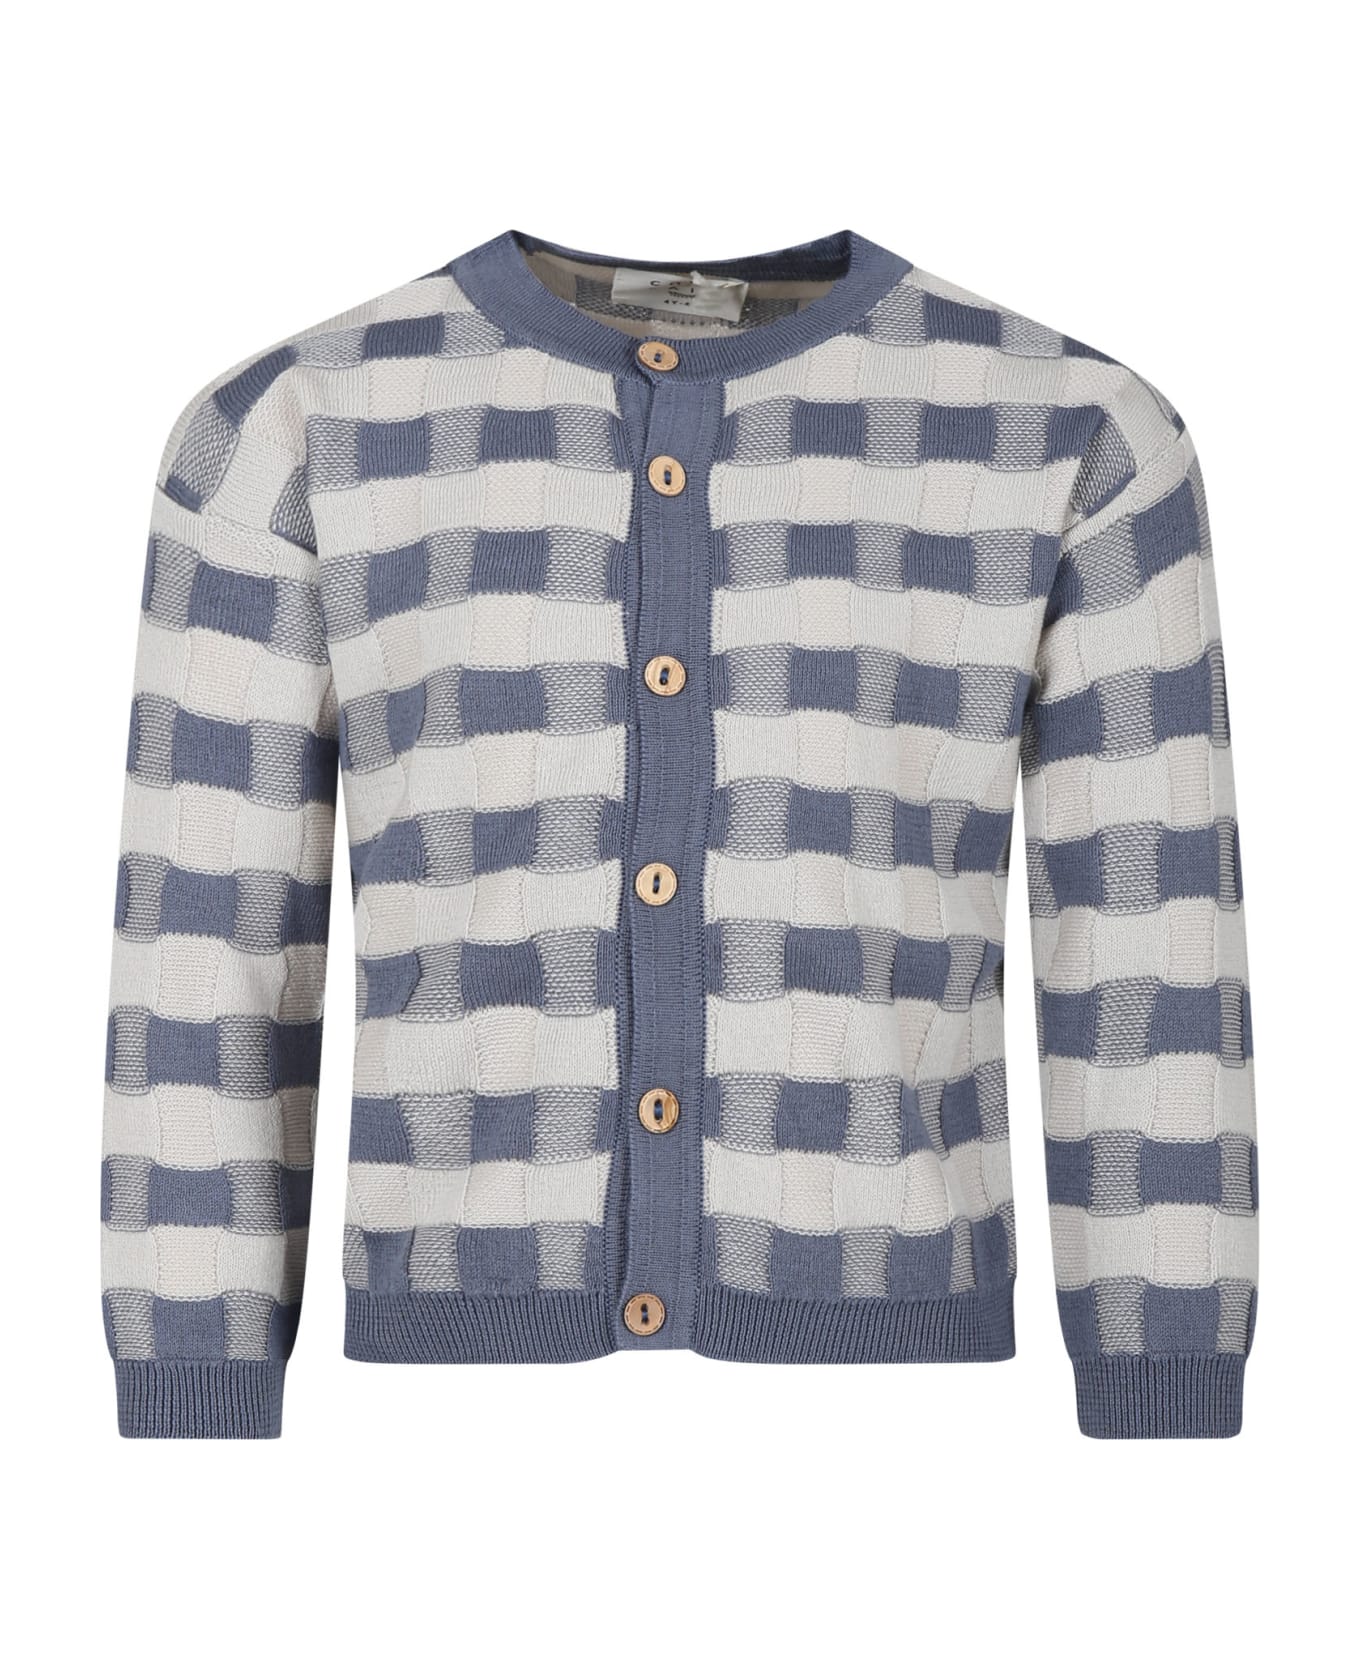 Coco Au Lait Light Blue Cardigan For Girl With Checkered Pattern - Multicolor